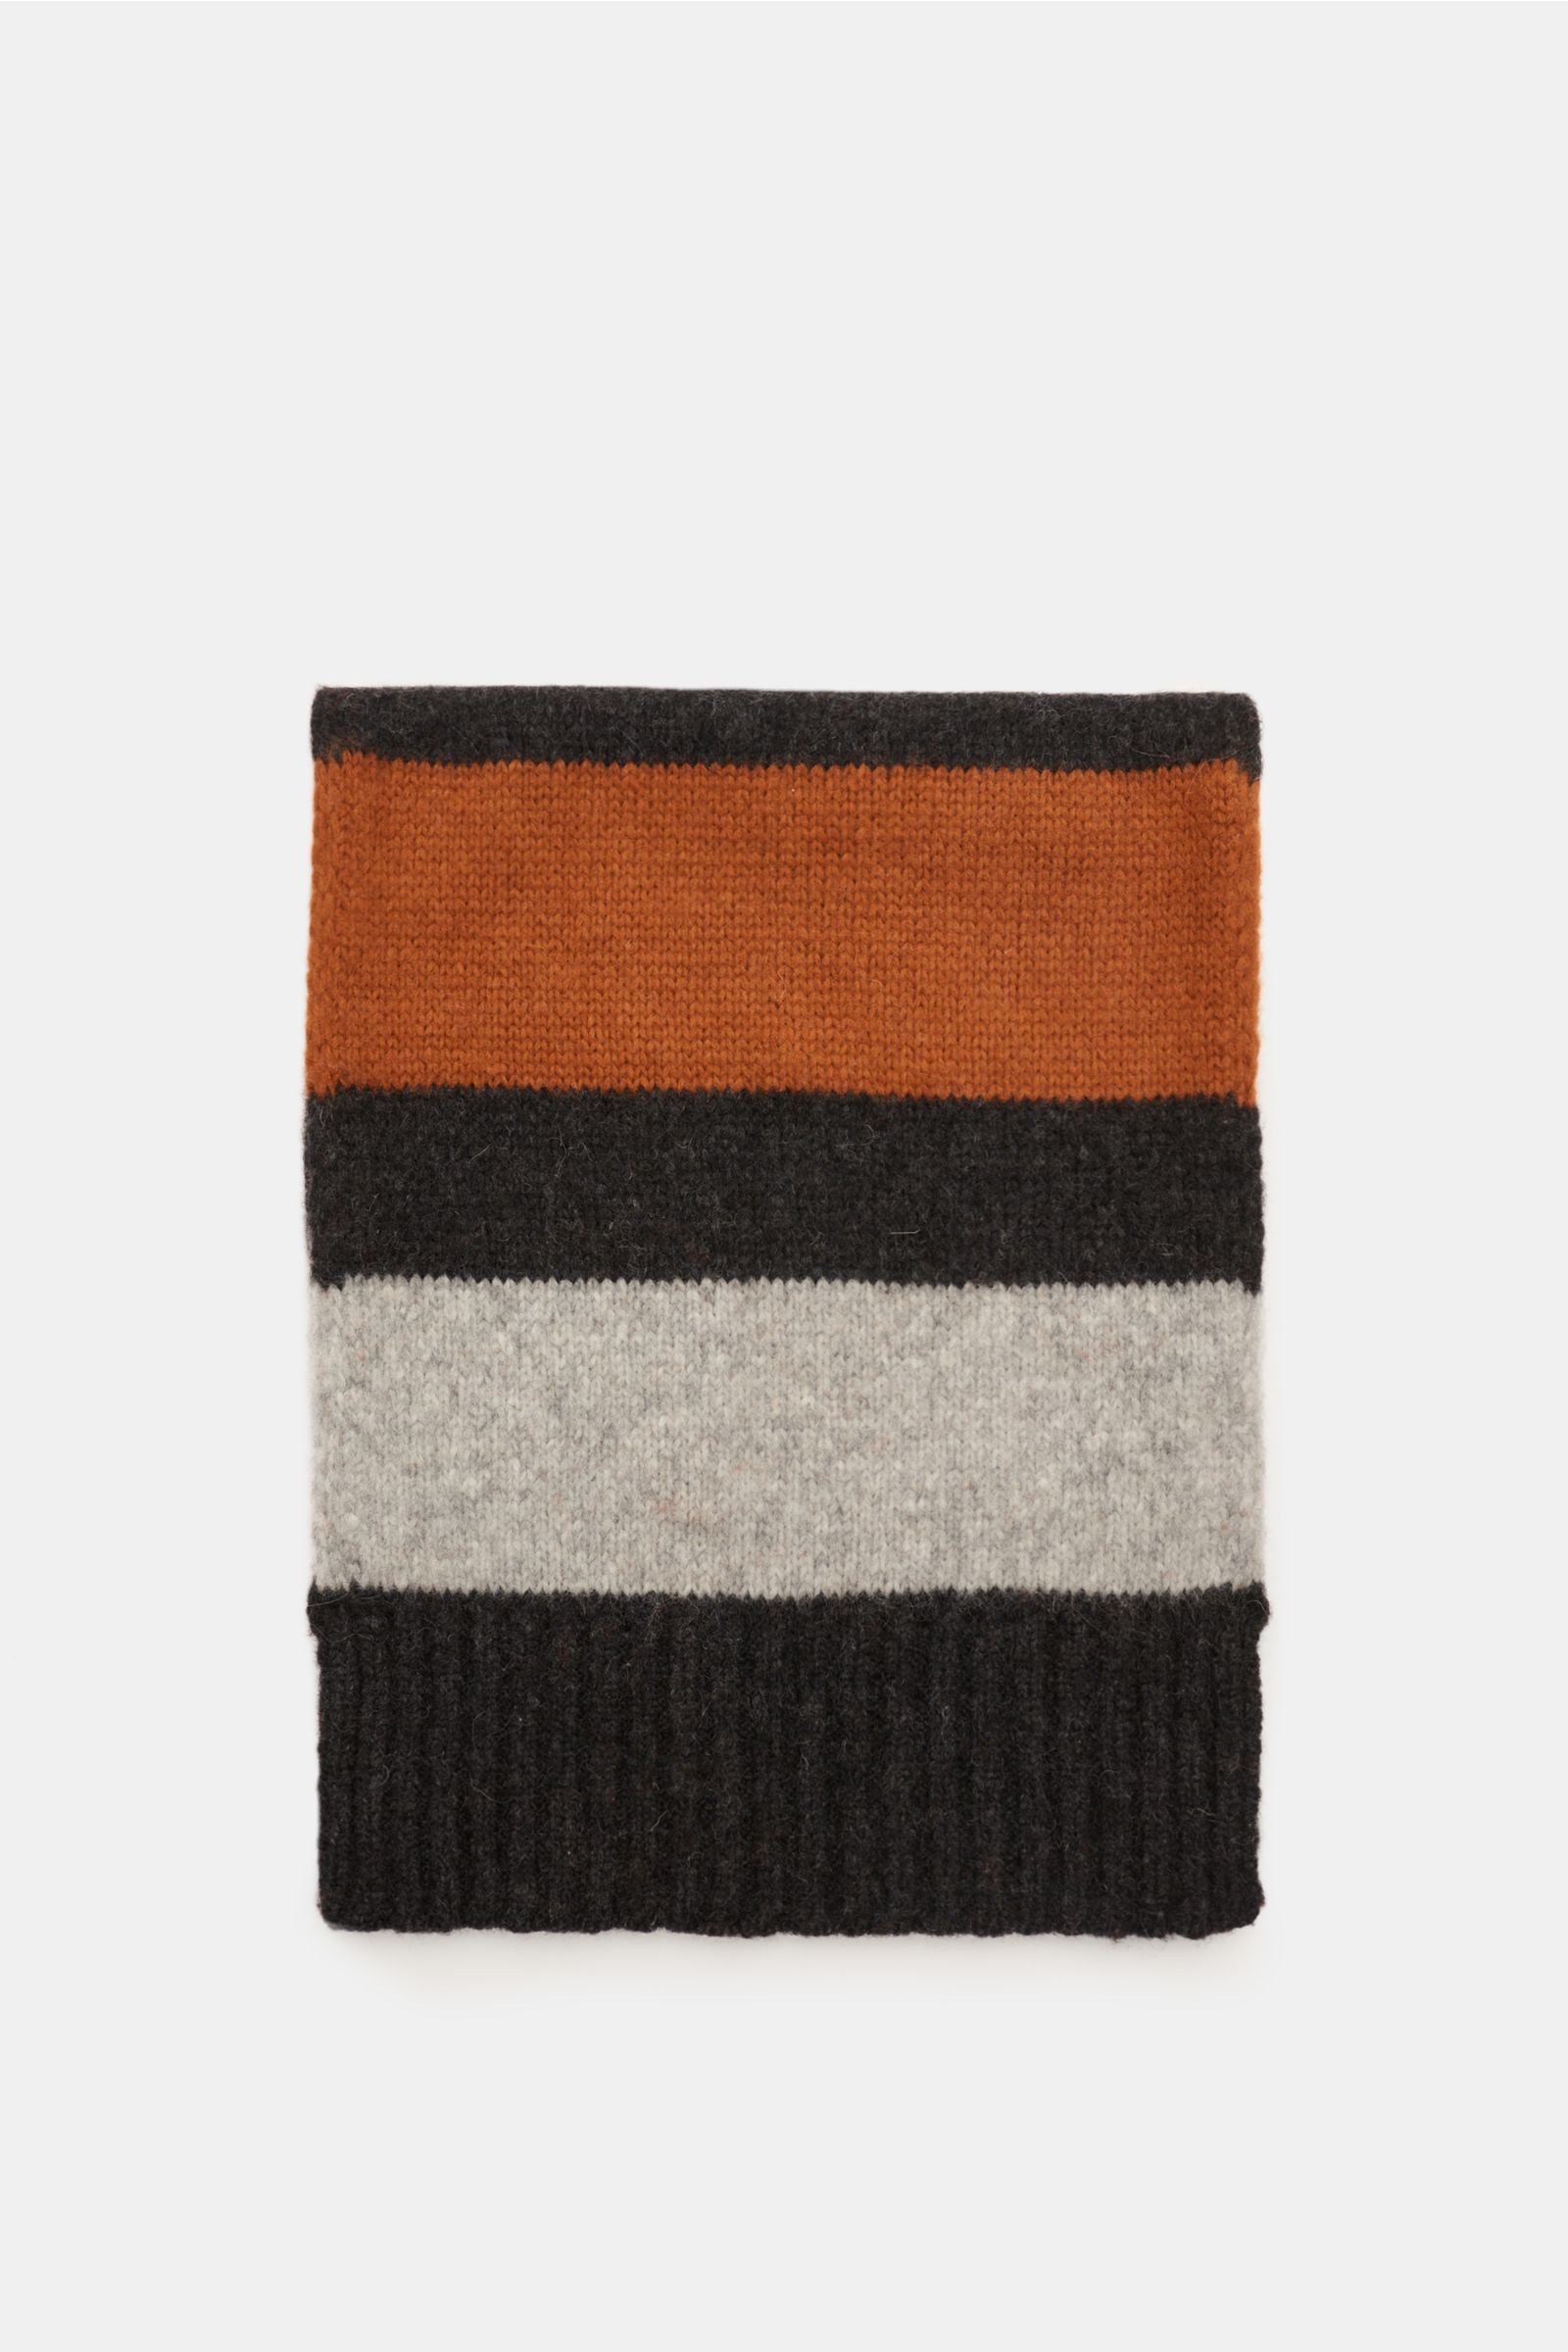 Scarf 'Aalbir' anthracite/rust red striped